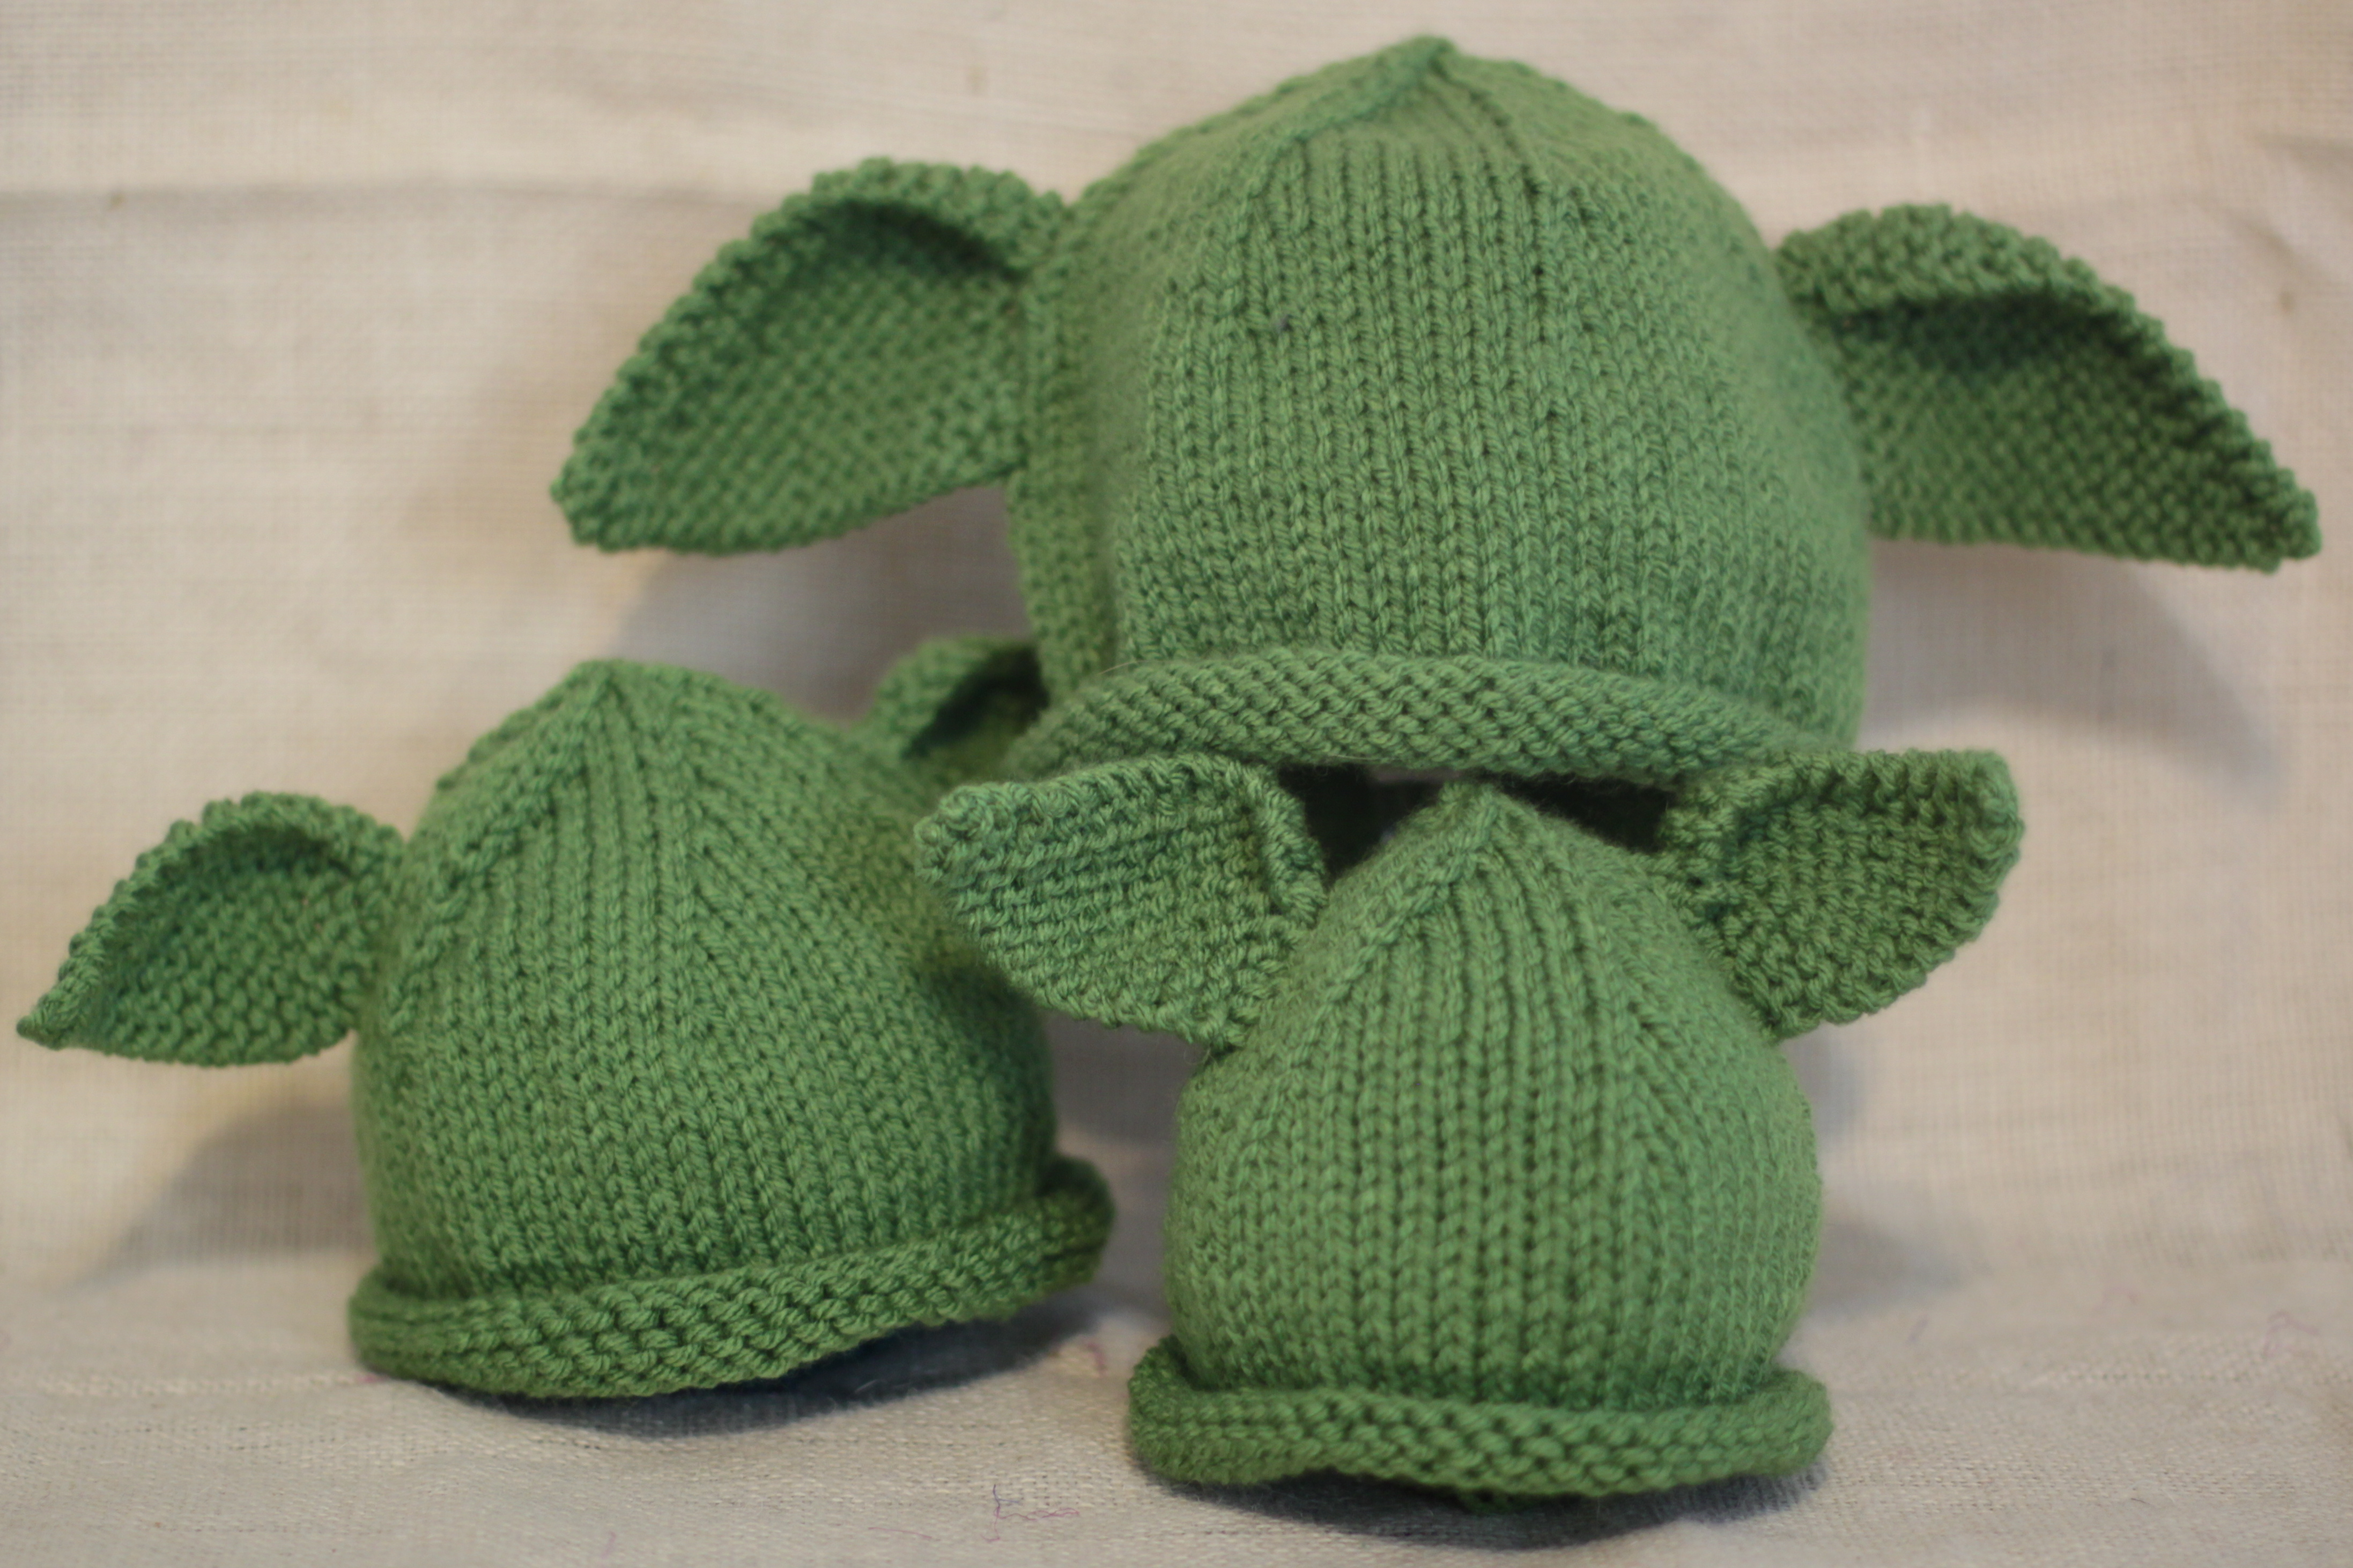 Free Crochet Yoda Hat Pattern Discount Code For How To Knit A Ba Yoda Hat Inside 6d6a1 0a2a2